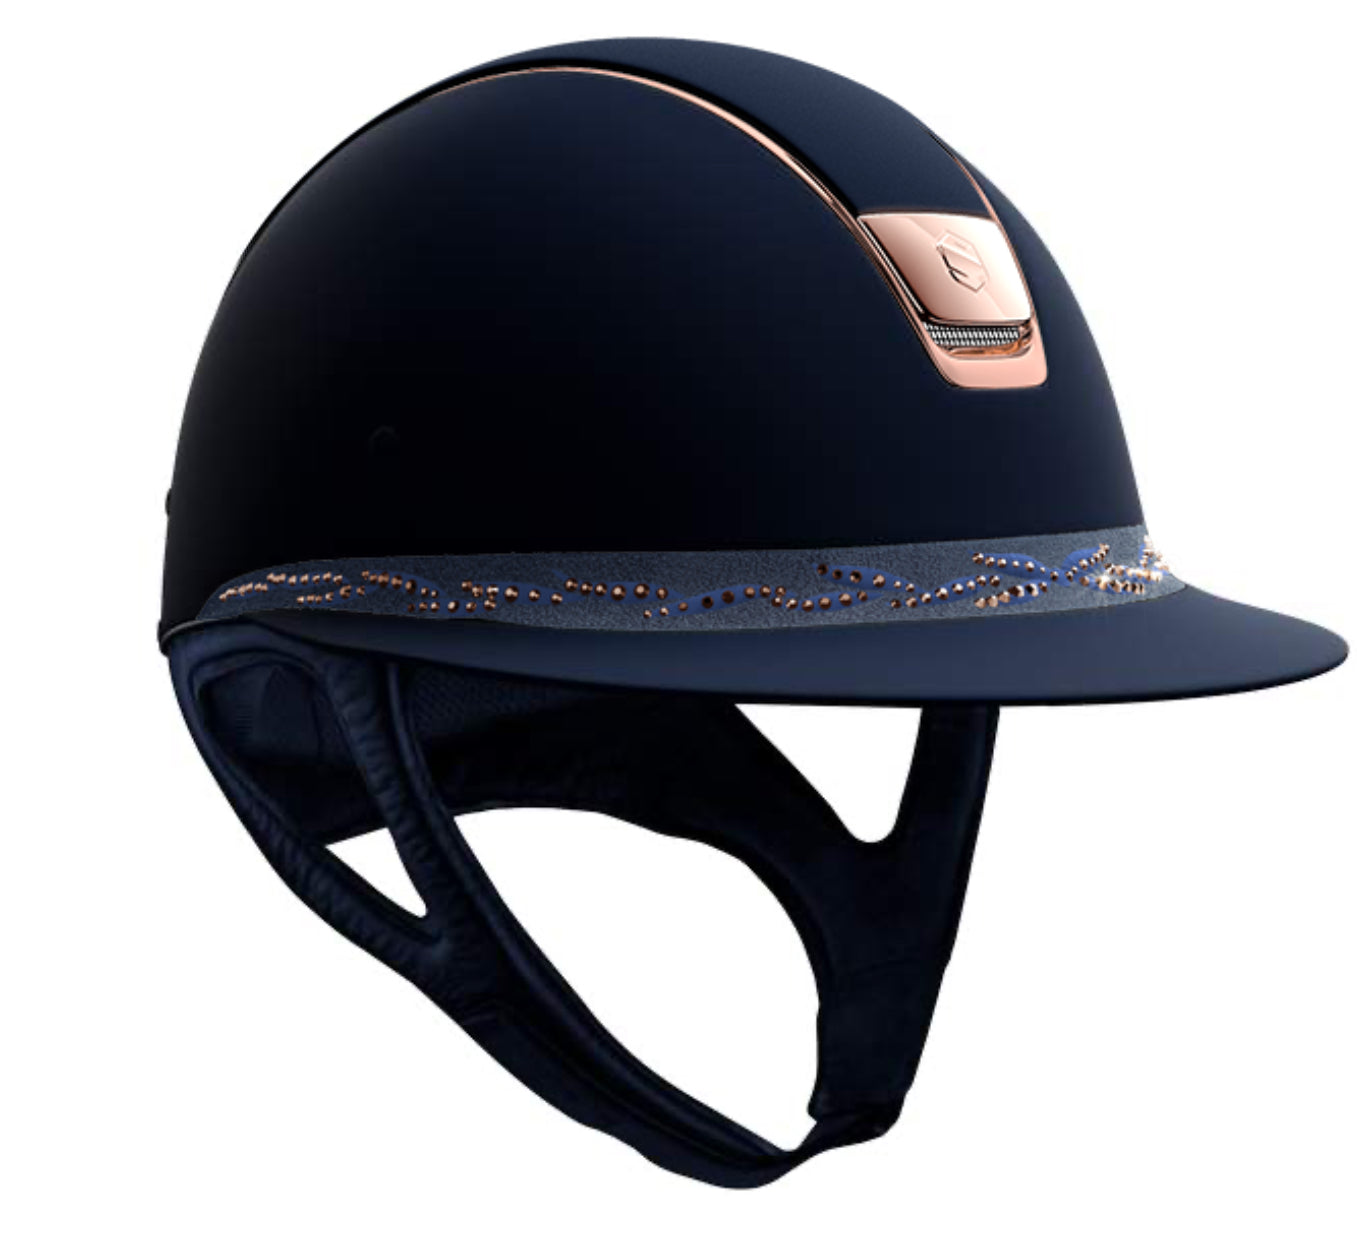 Samshield Miss shield blue riding hat with rose gold trim and blazon and vintage rose flower Swarovski frontal band